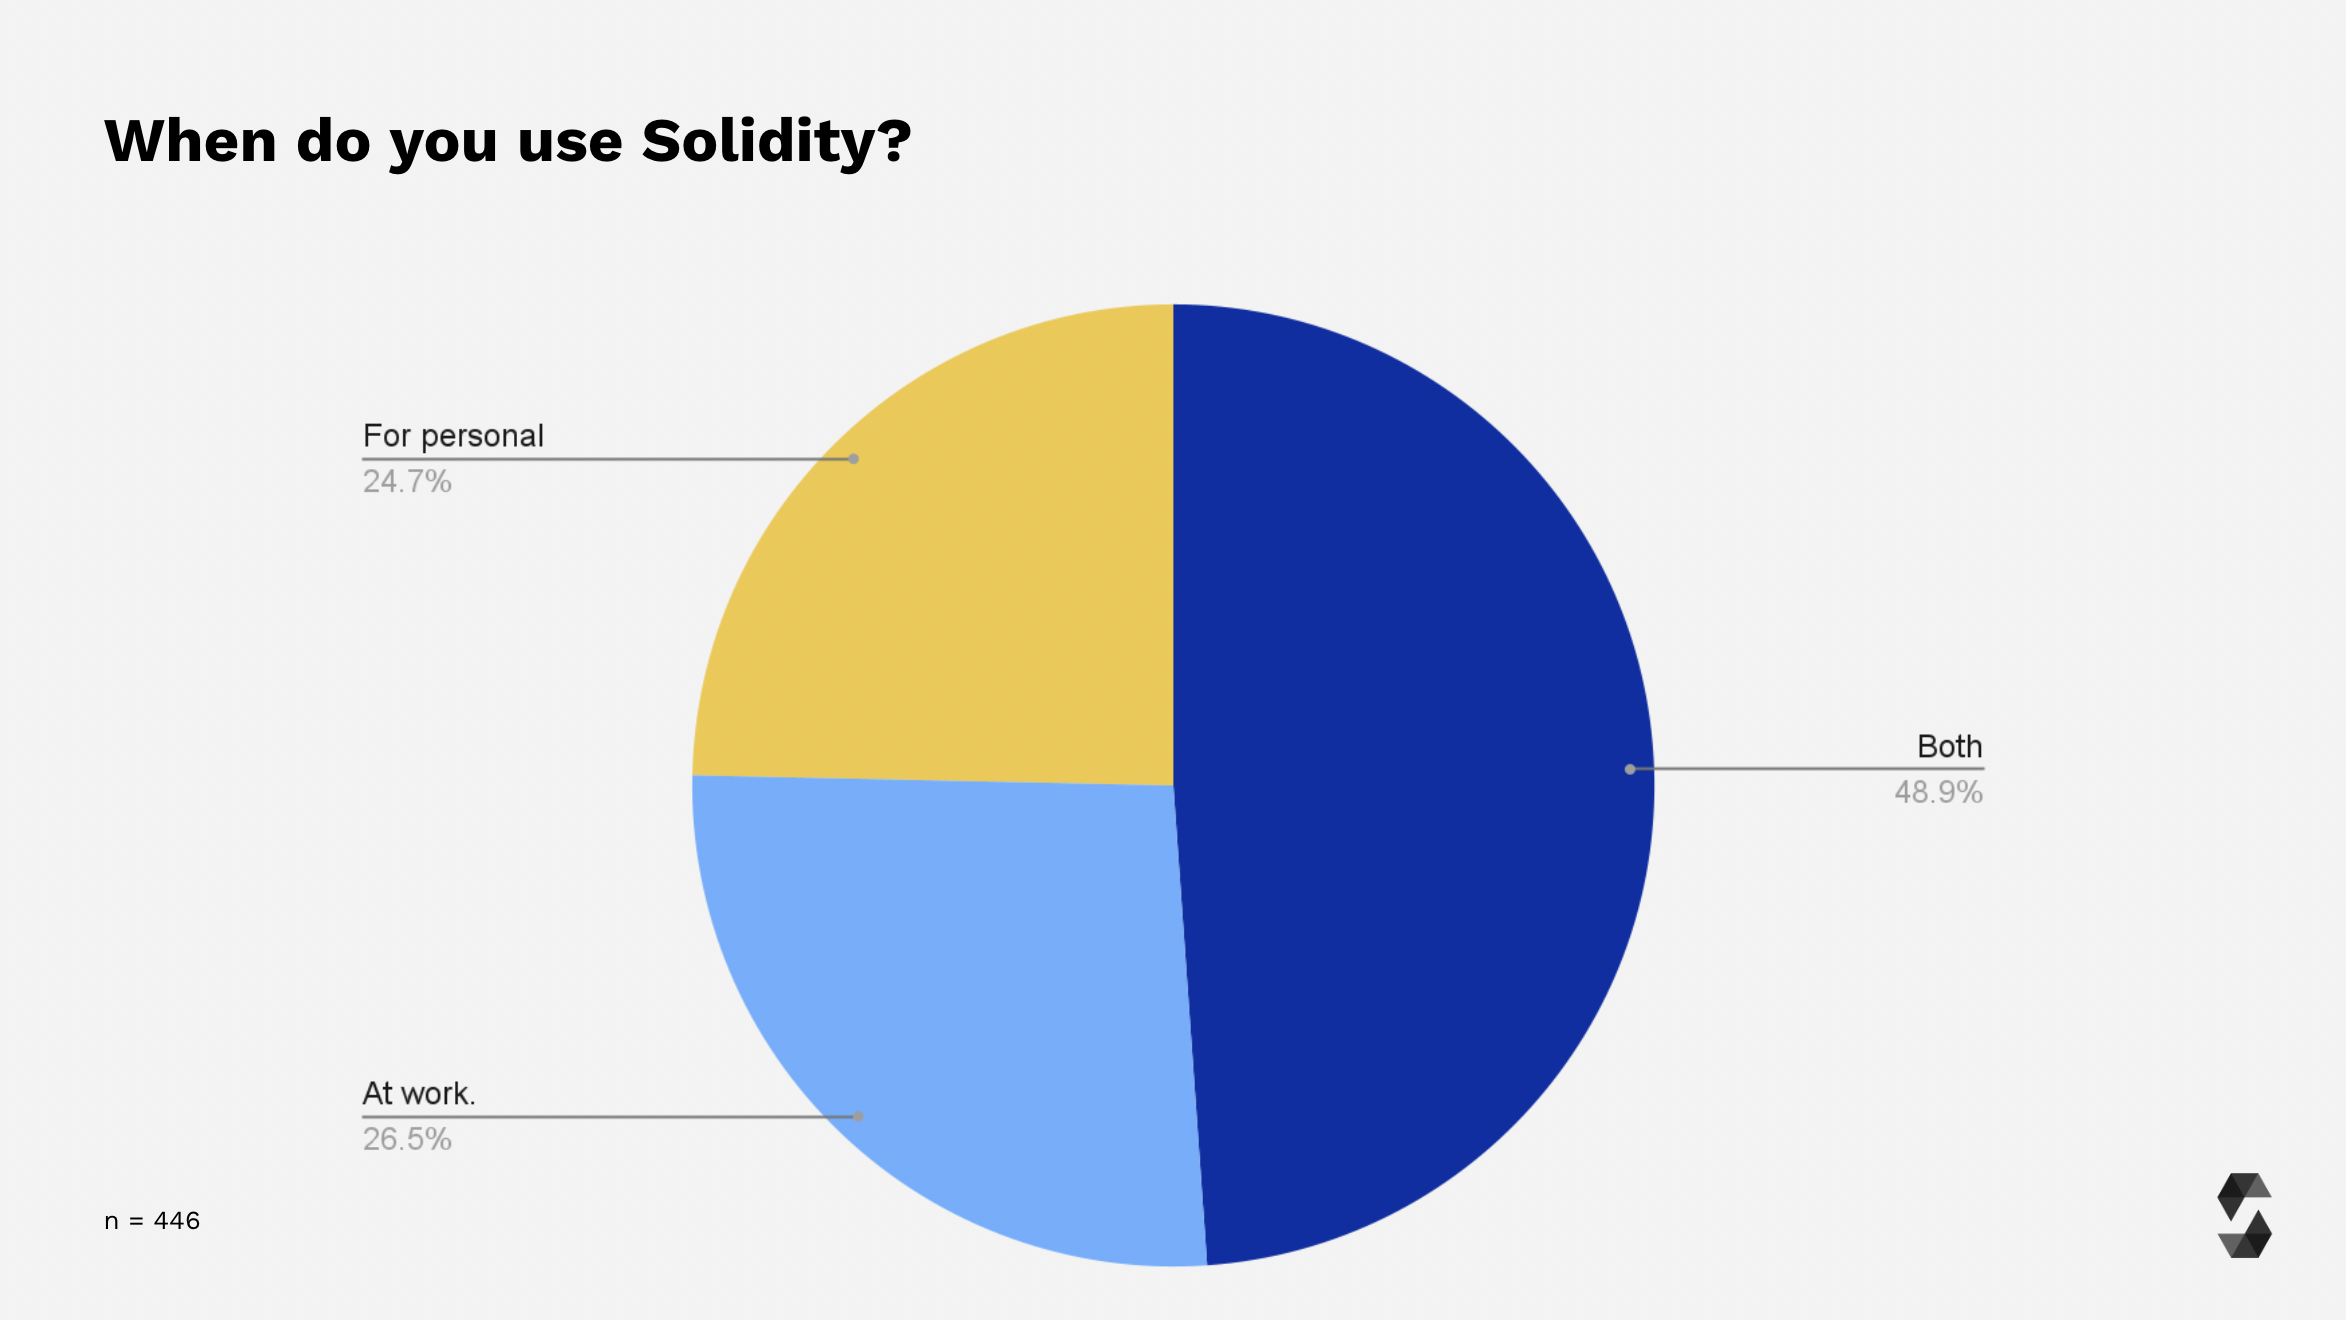 Solidity usage